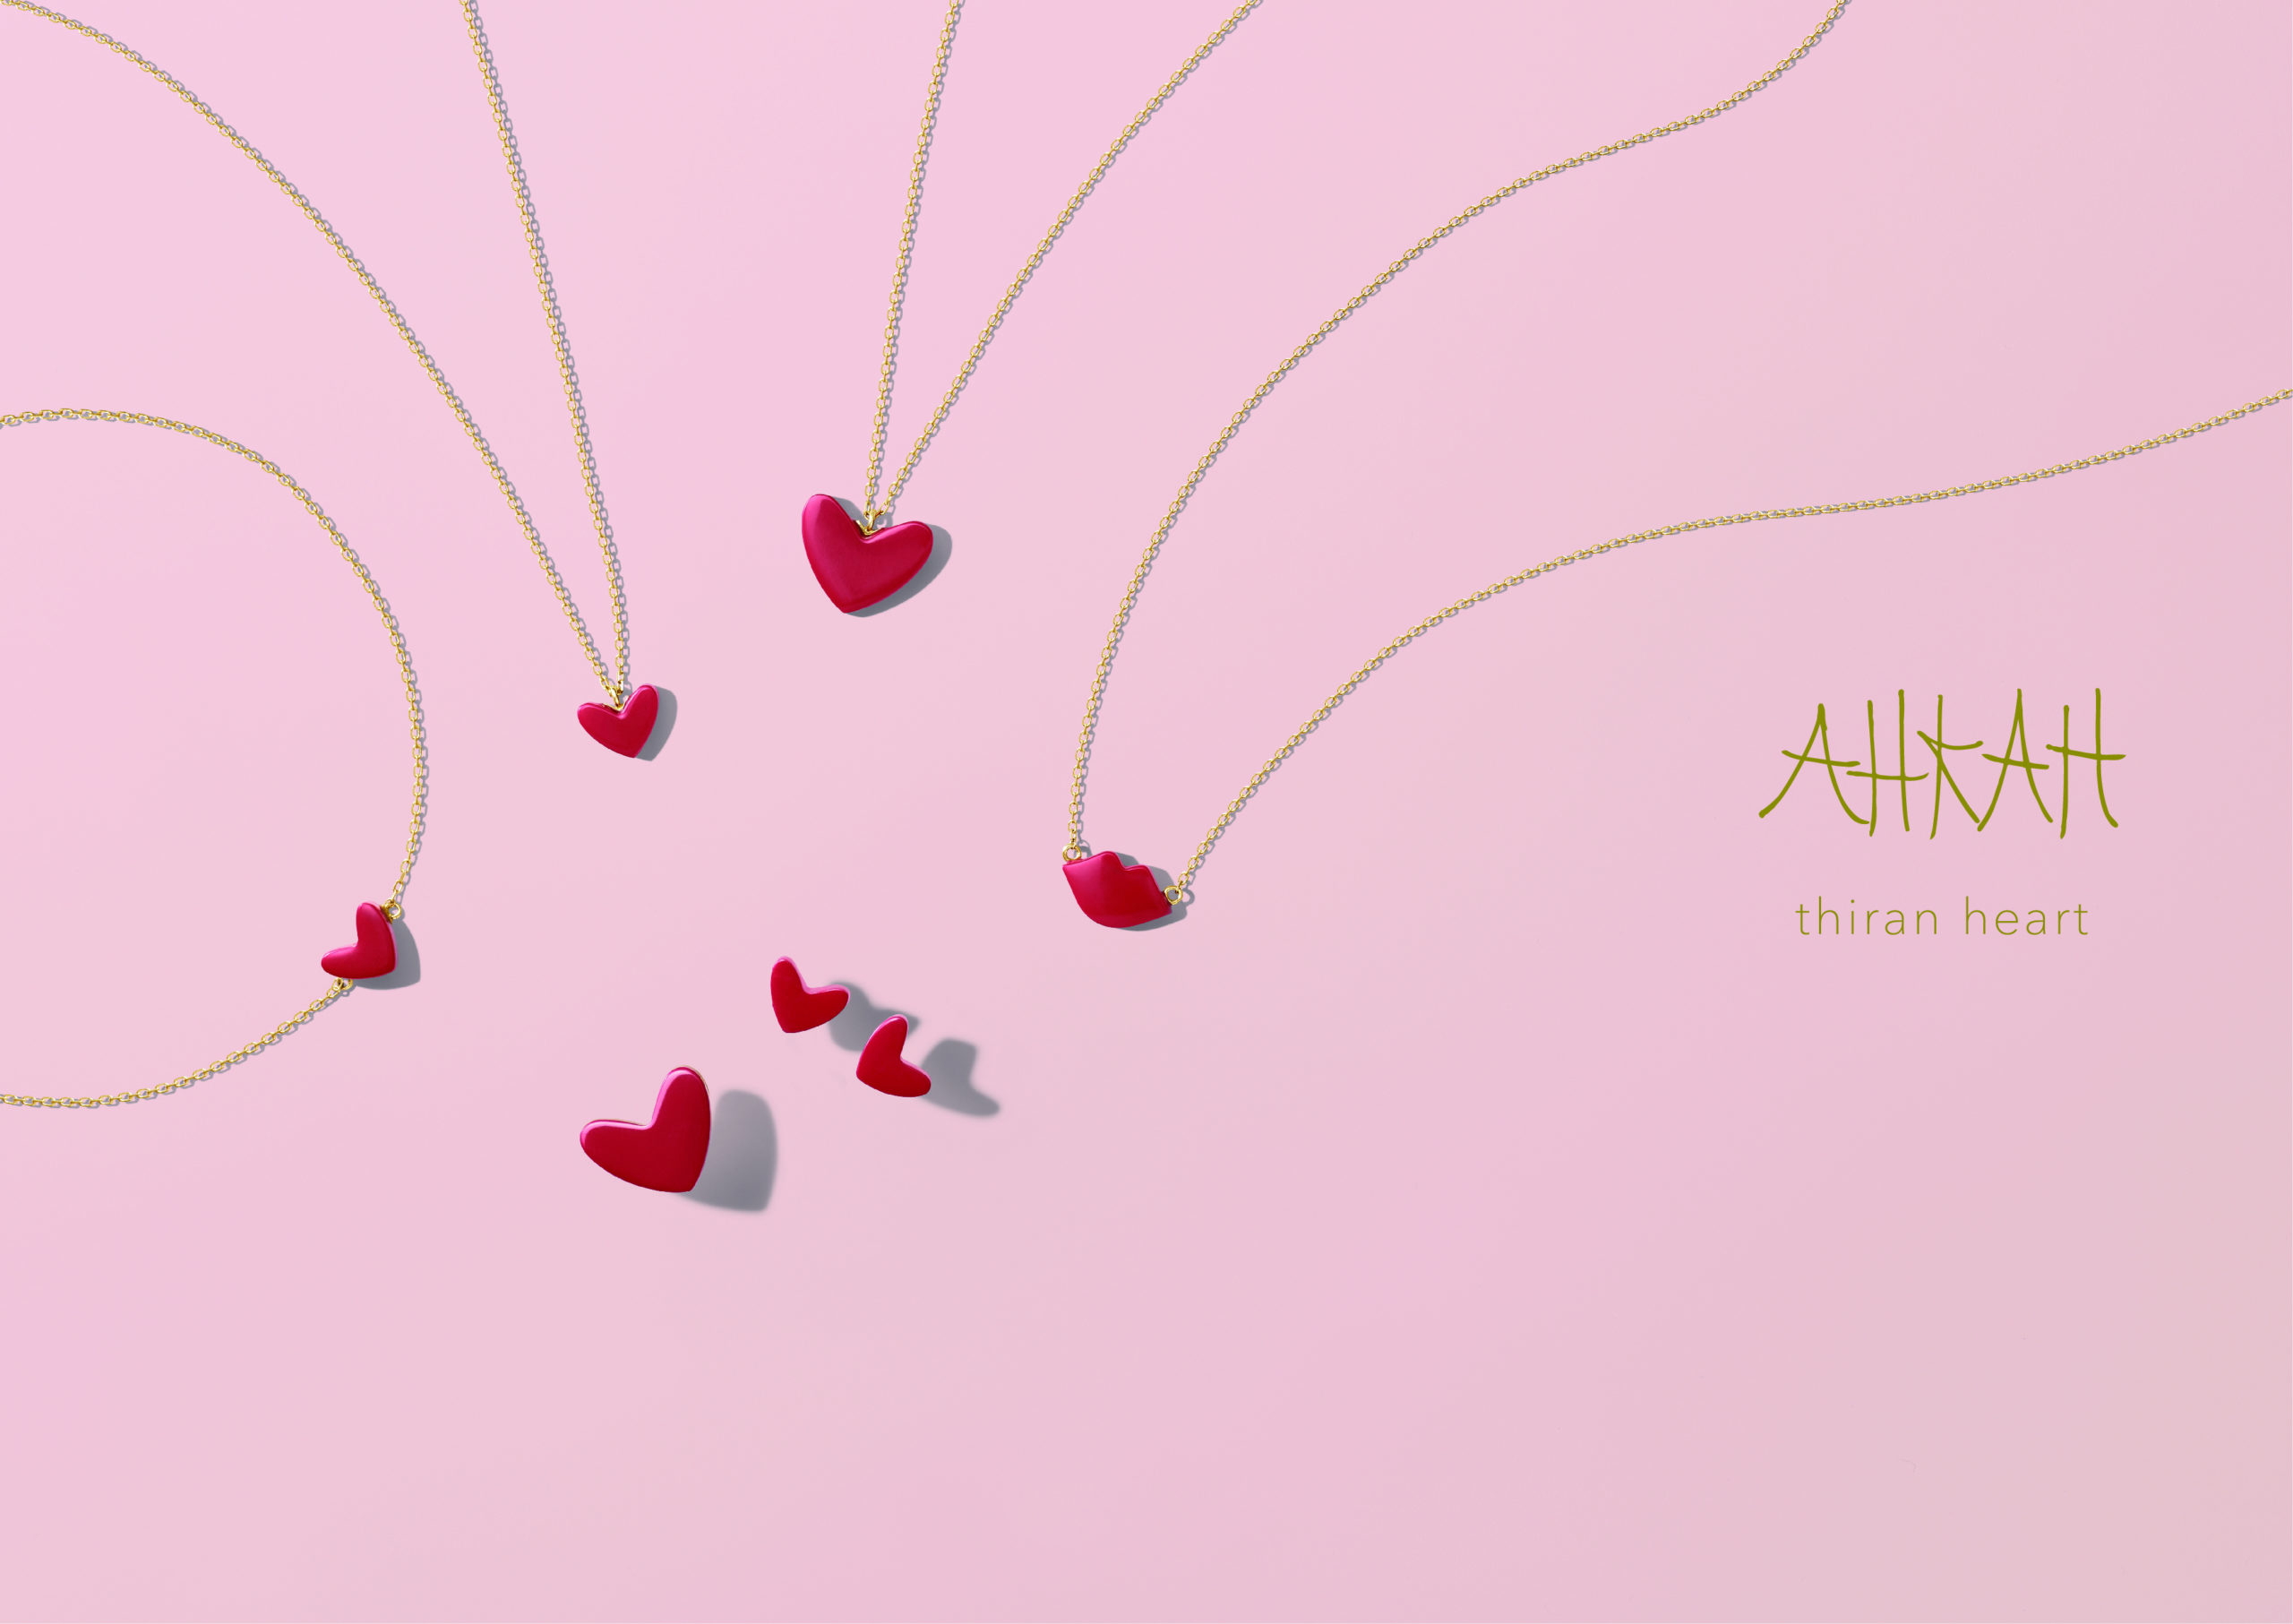 Japanese fashion jewelry brand AHKAH launched a flagship store on JD